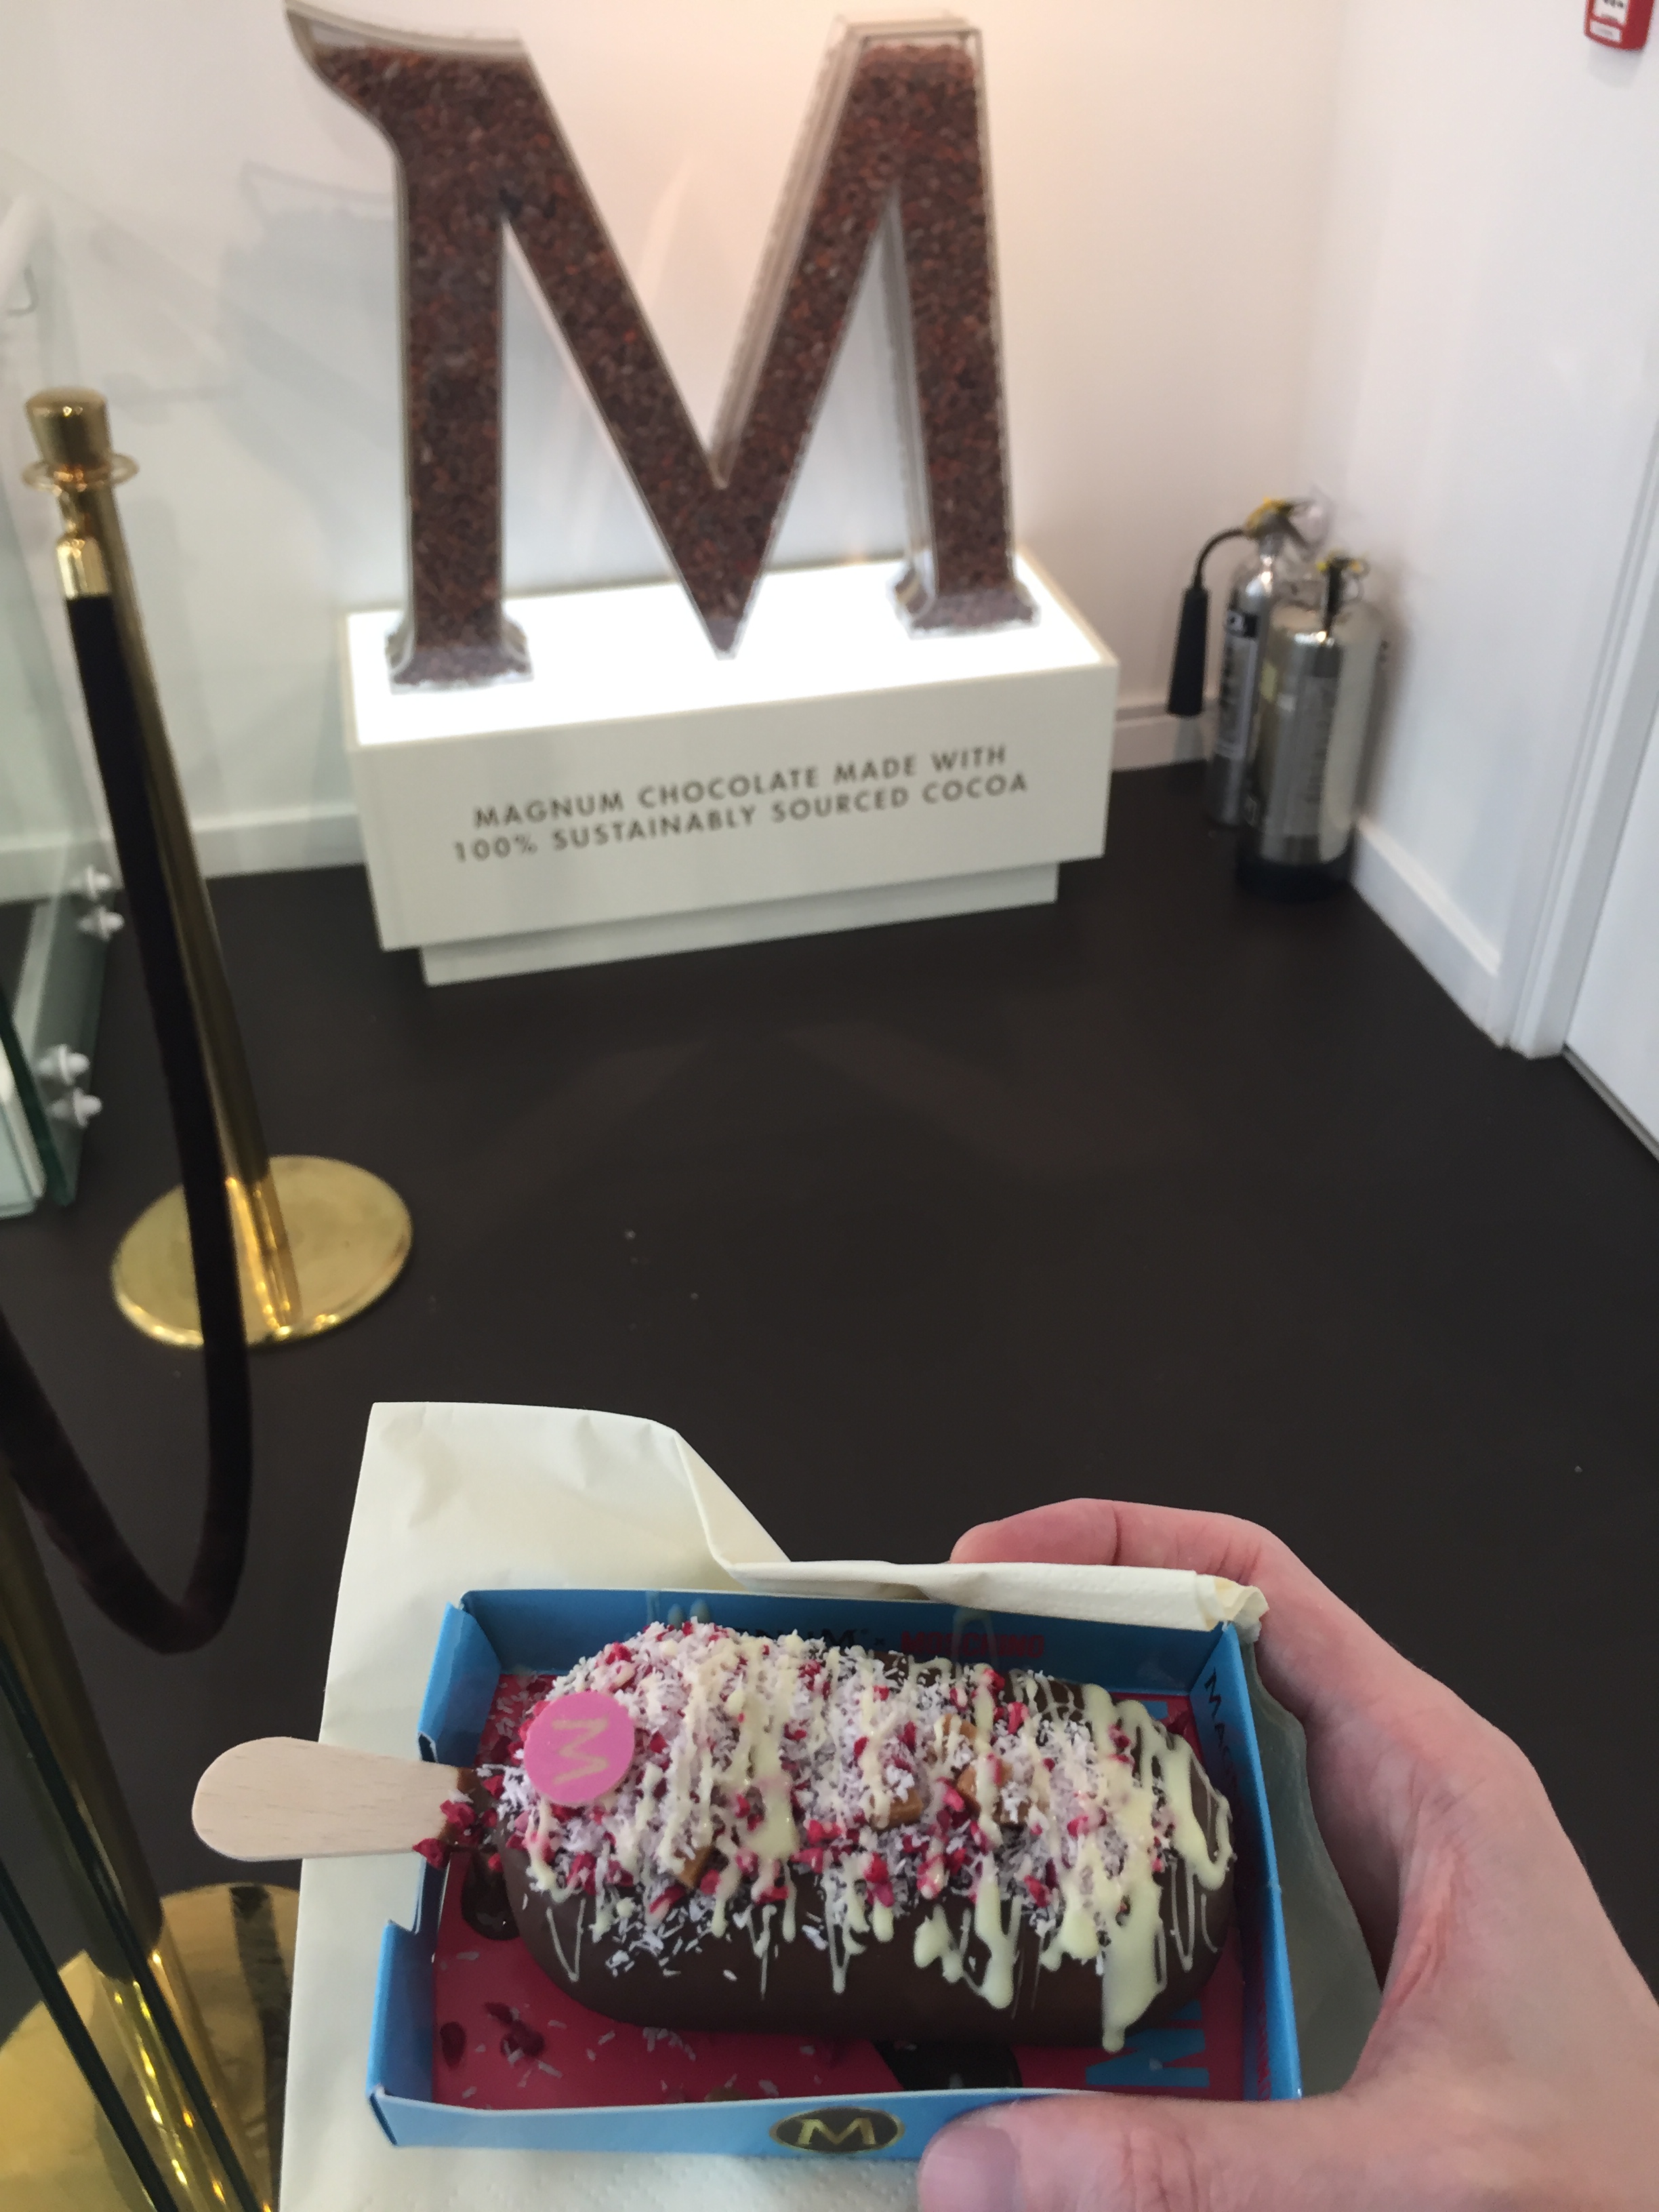 My custom designed Magnum, with double layered milk chocolate, coconut shavings, raspberry pieces, caramel fudge, raspberry white chocolate coins, and white chocolate drizzle. It's being held in front of a sign in the shape of a large letter M, under which text says Magnum chocolate made with 100% sustainably sourced cocoa.